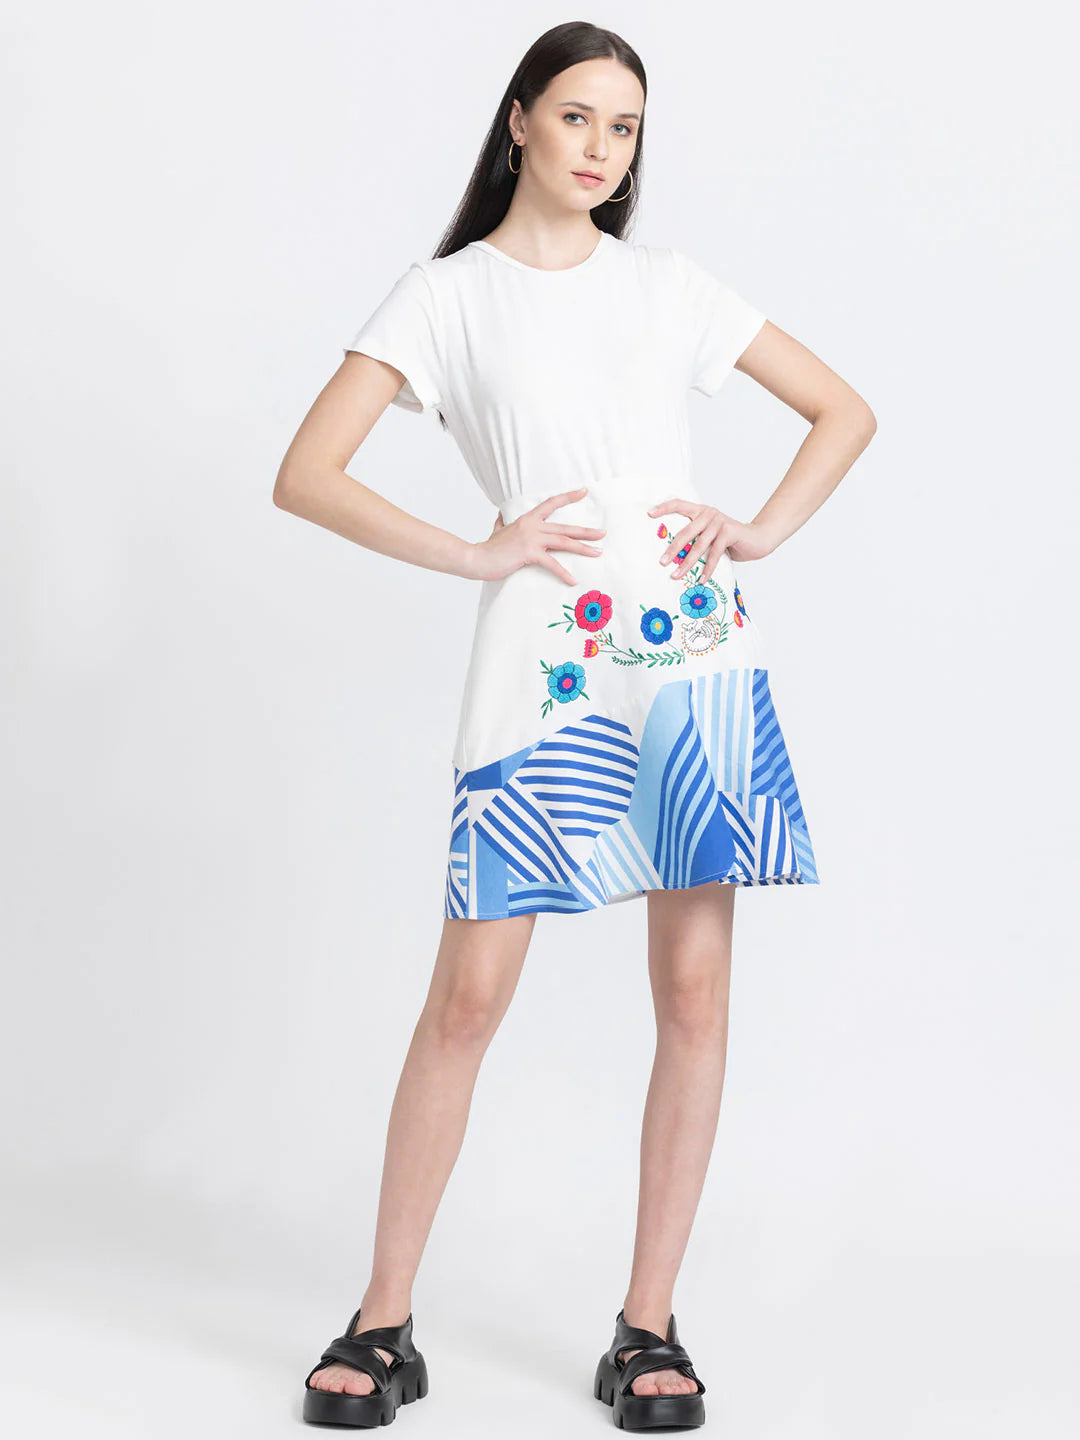 White Printed Fit Skirt | White Printed Fit & Flare Skirt